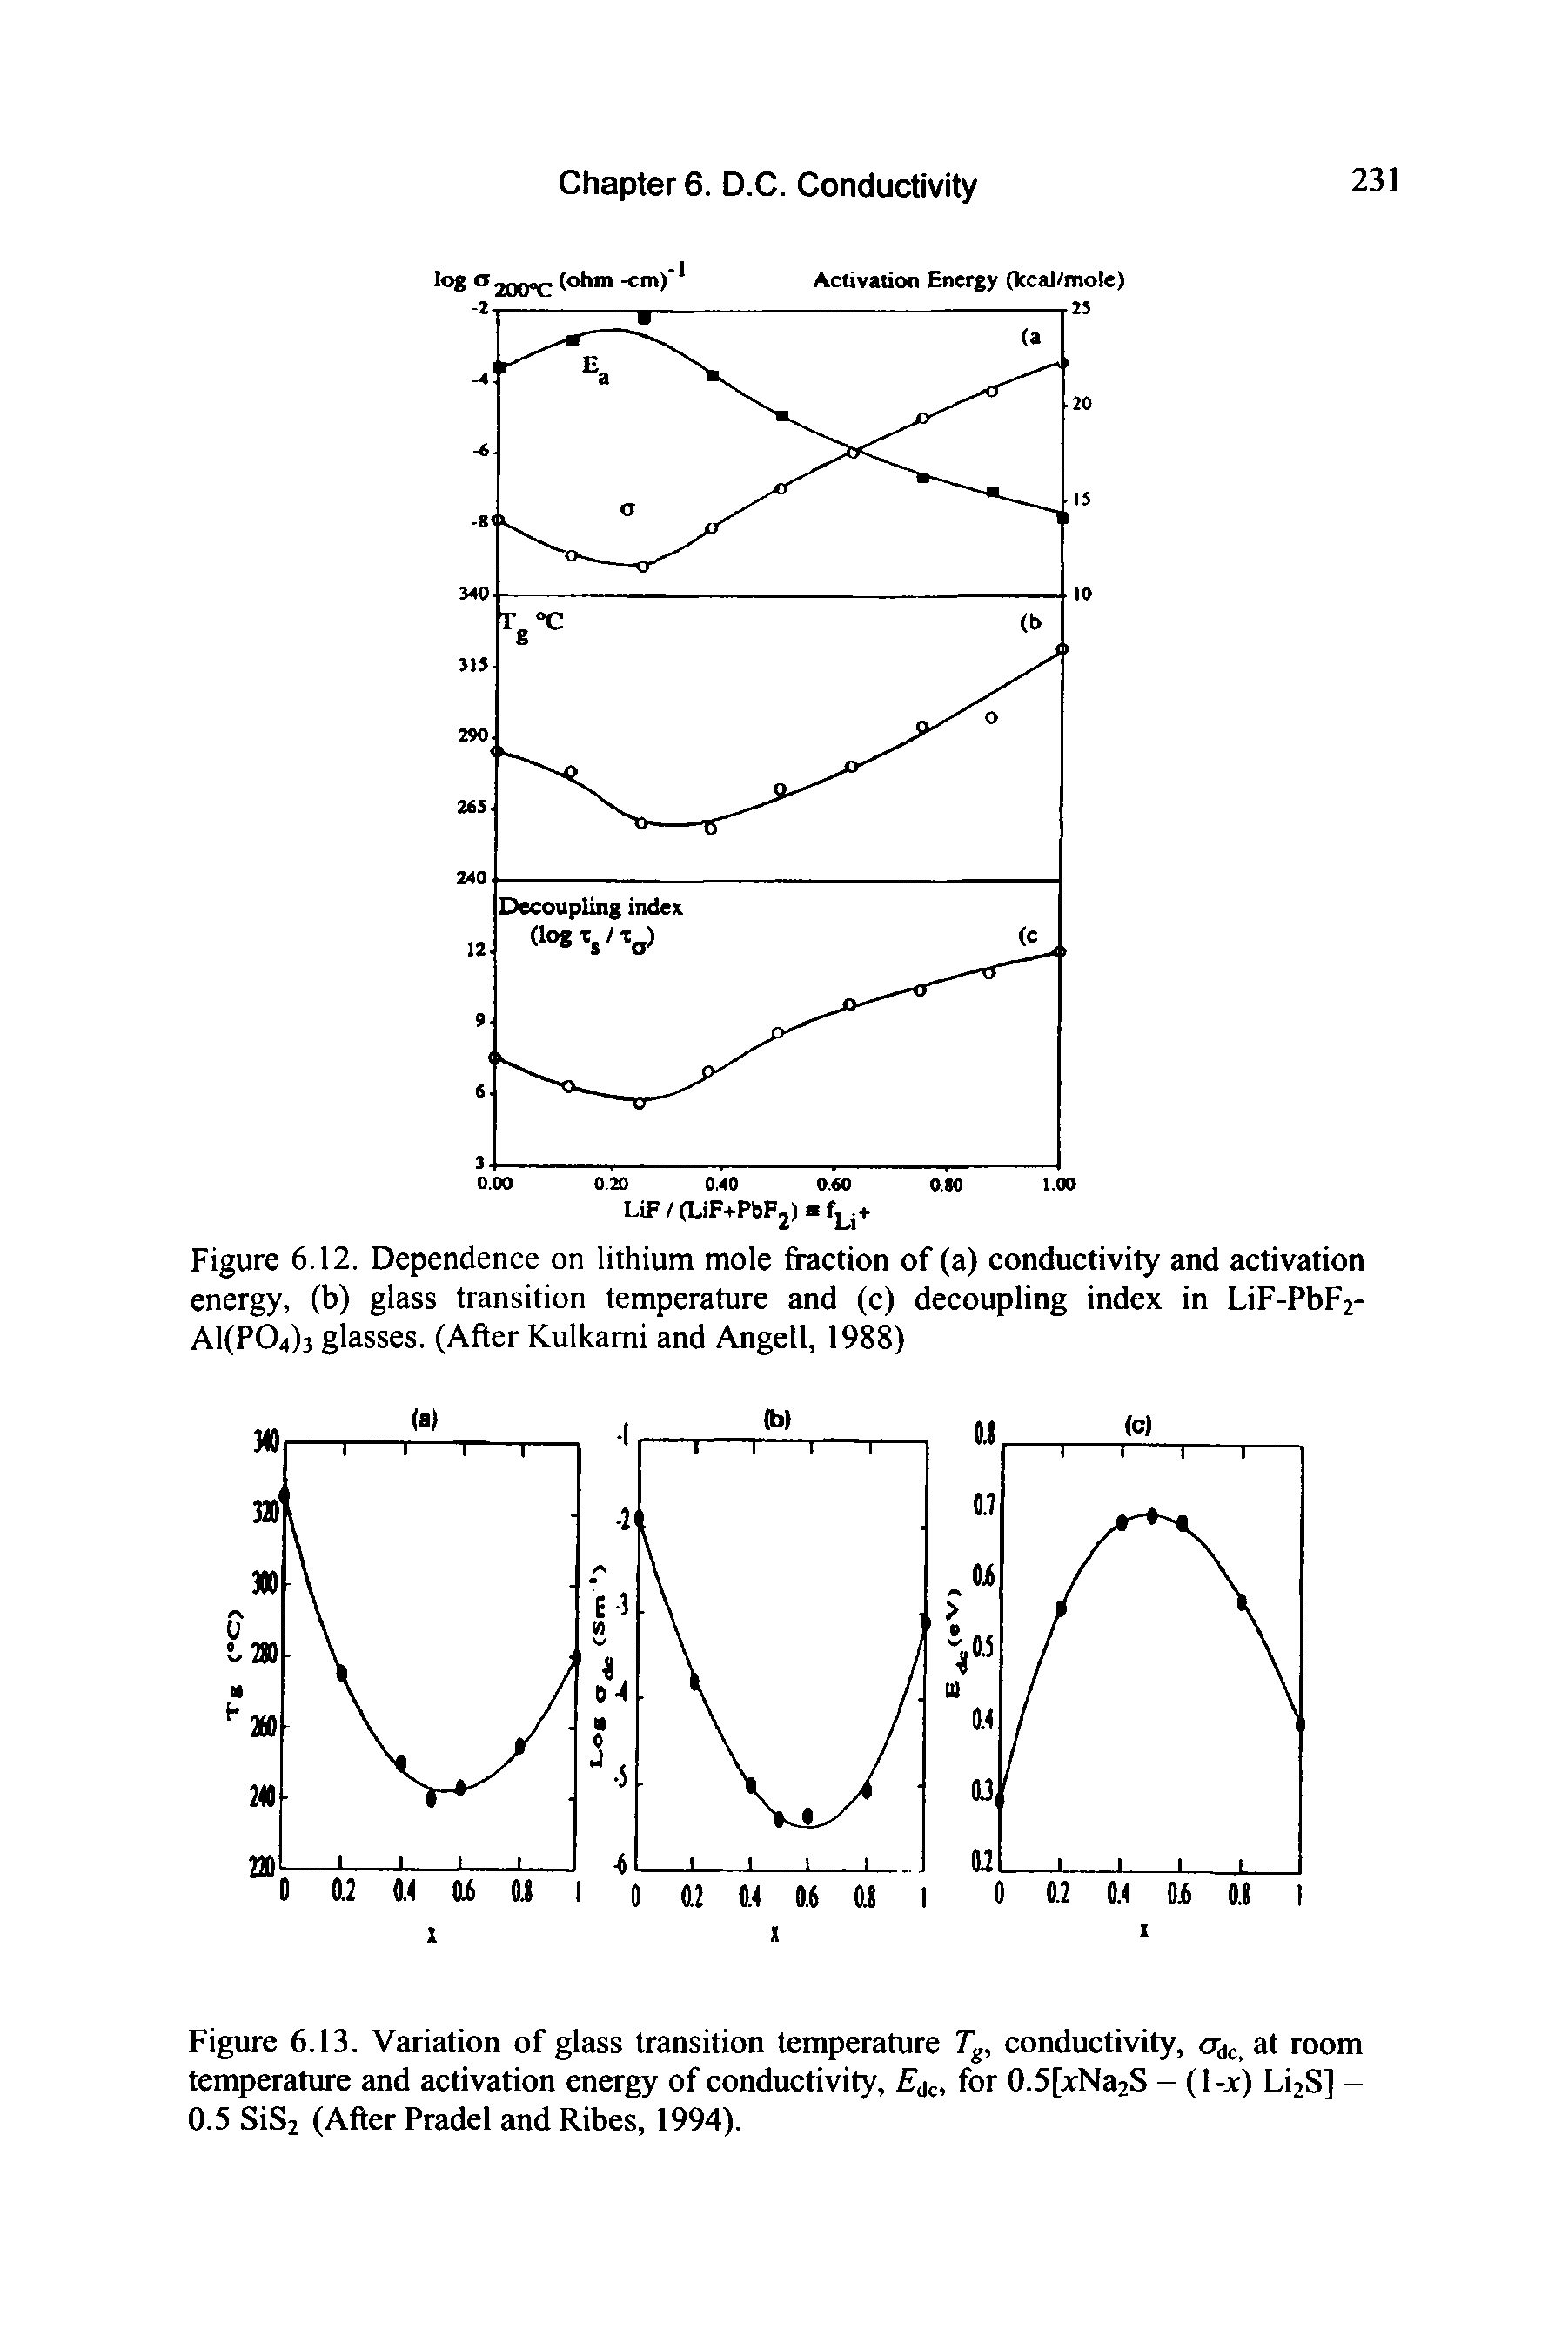 Figure 6.12. Dependence on lithium mole fraction of (a) conductivity and activation energy, (b) glass transition temperature and (c) decoupling index in LiF-Pbp2-A1(P04)3 glasses. (After Kulkami and Angell, 1988)...